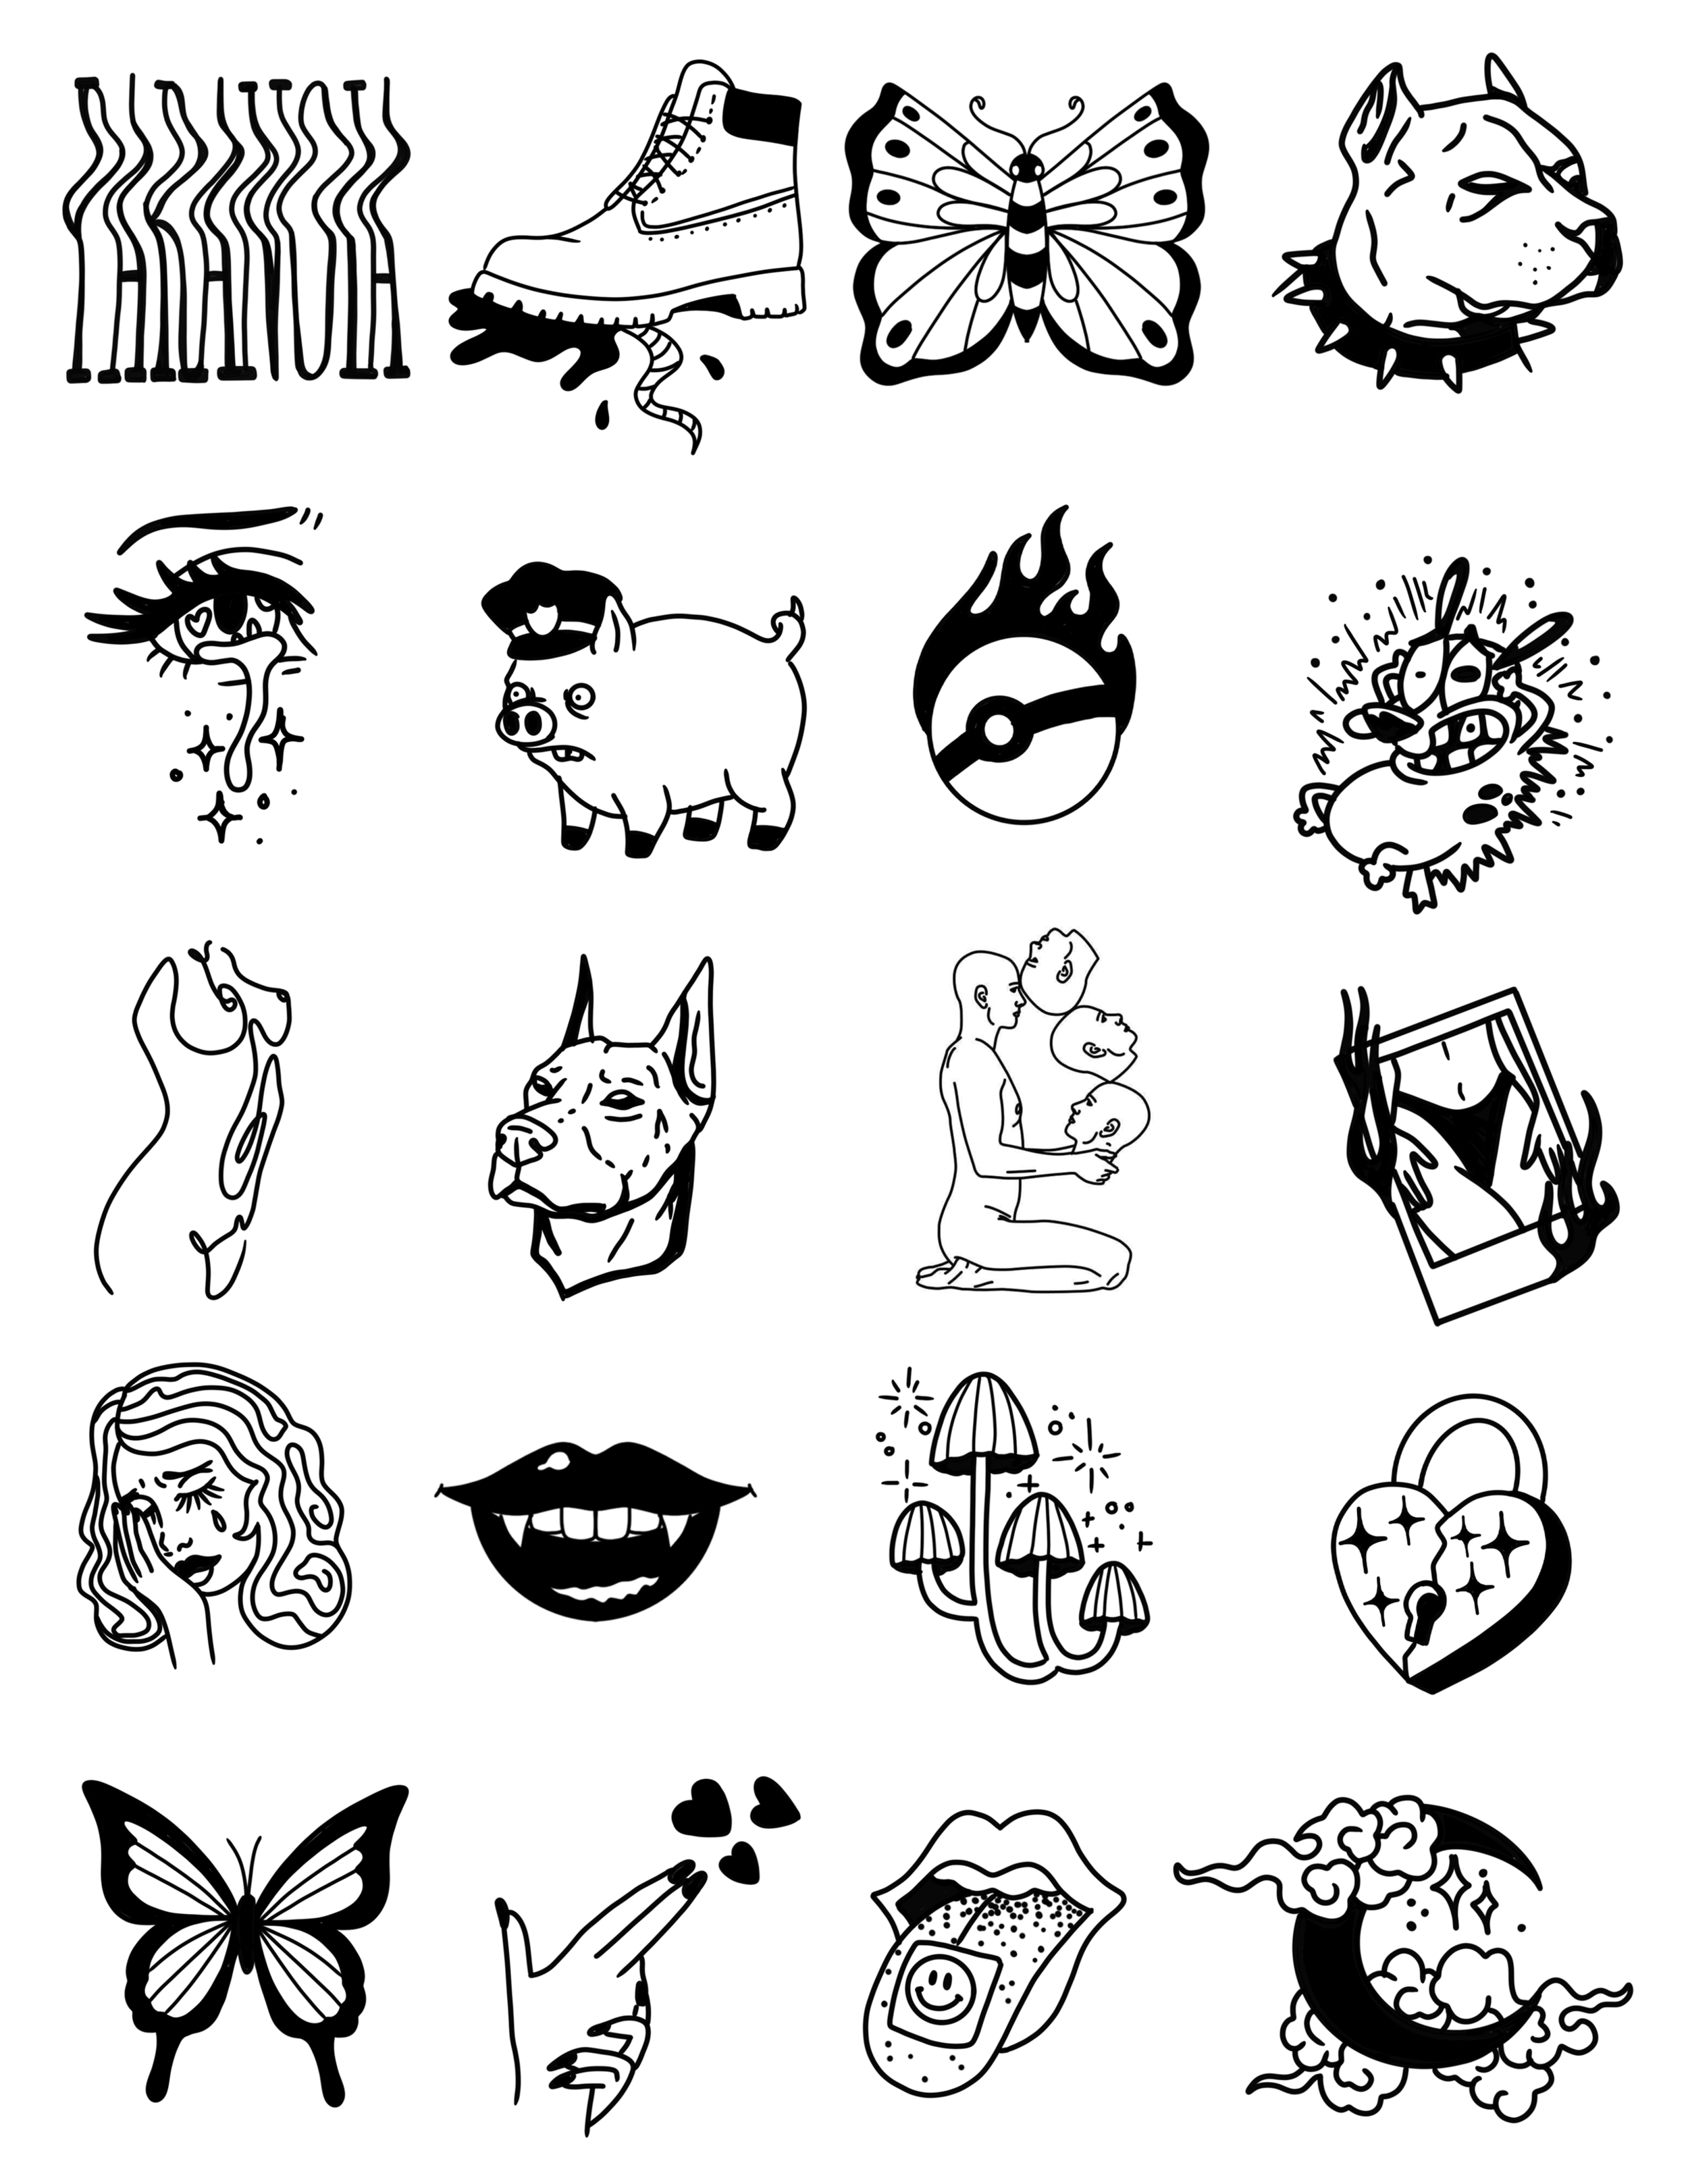 739 Tattoo Flash Eagle Images Stock Photos  Vectors  Shutterstock